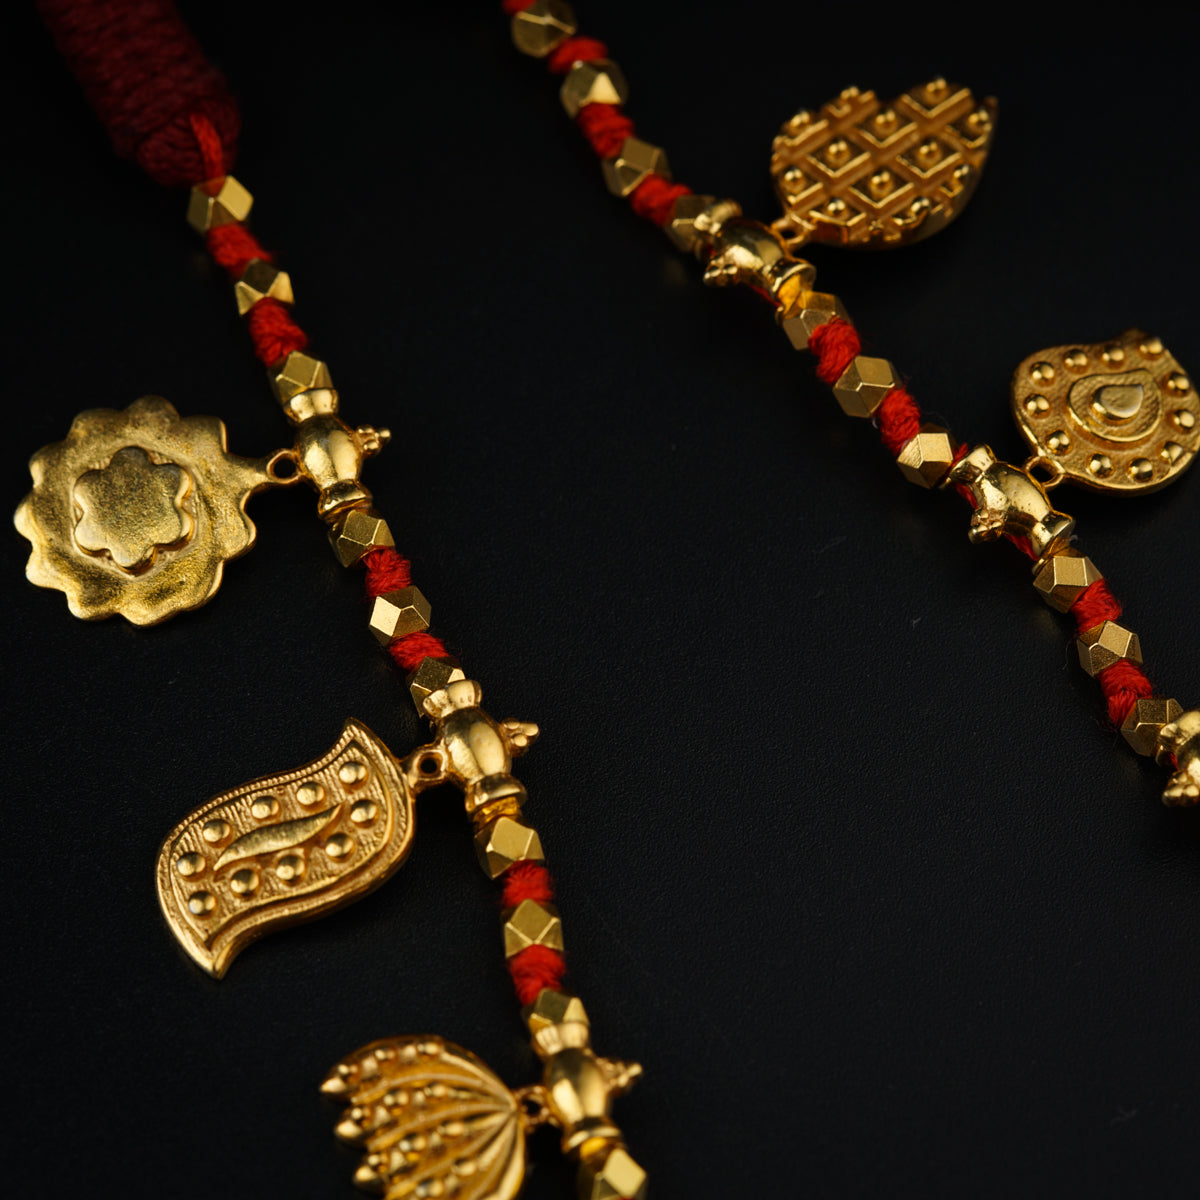 a close up of a gold necklace with red beads